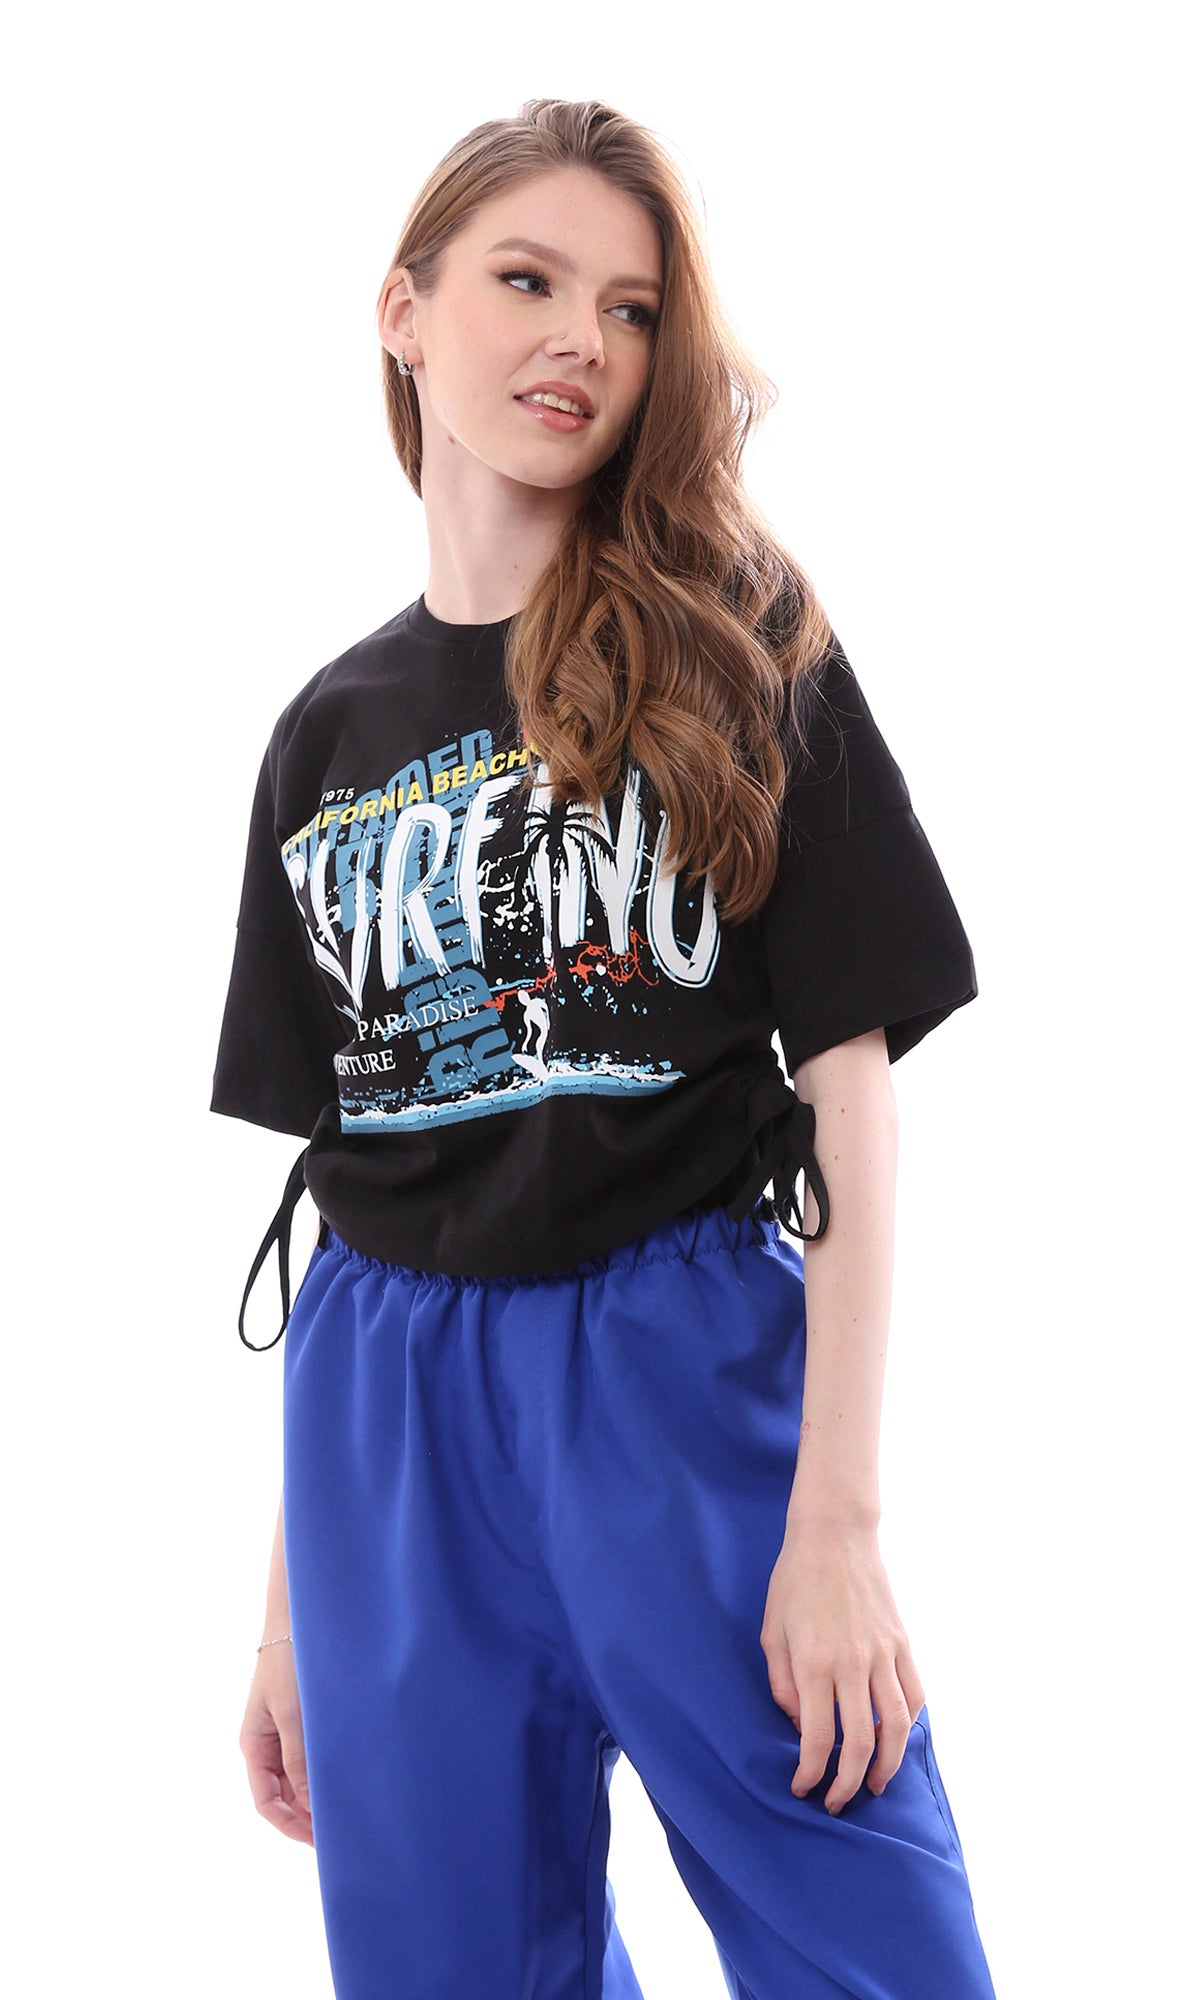 O165475 Black Cropped T-Shirt "Surfing" Printed With Side Drawstring